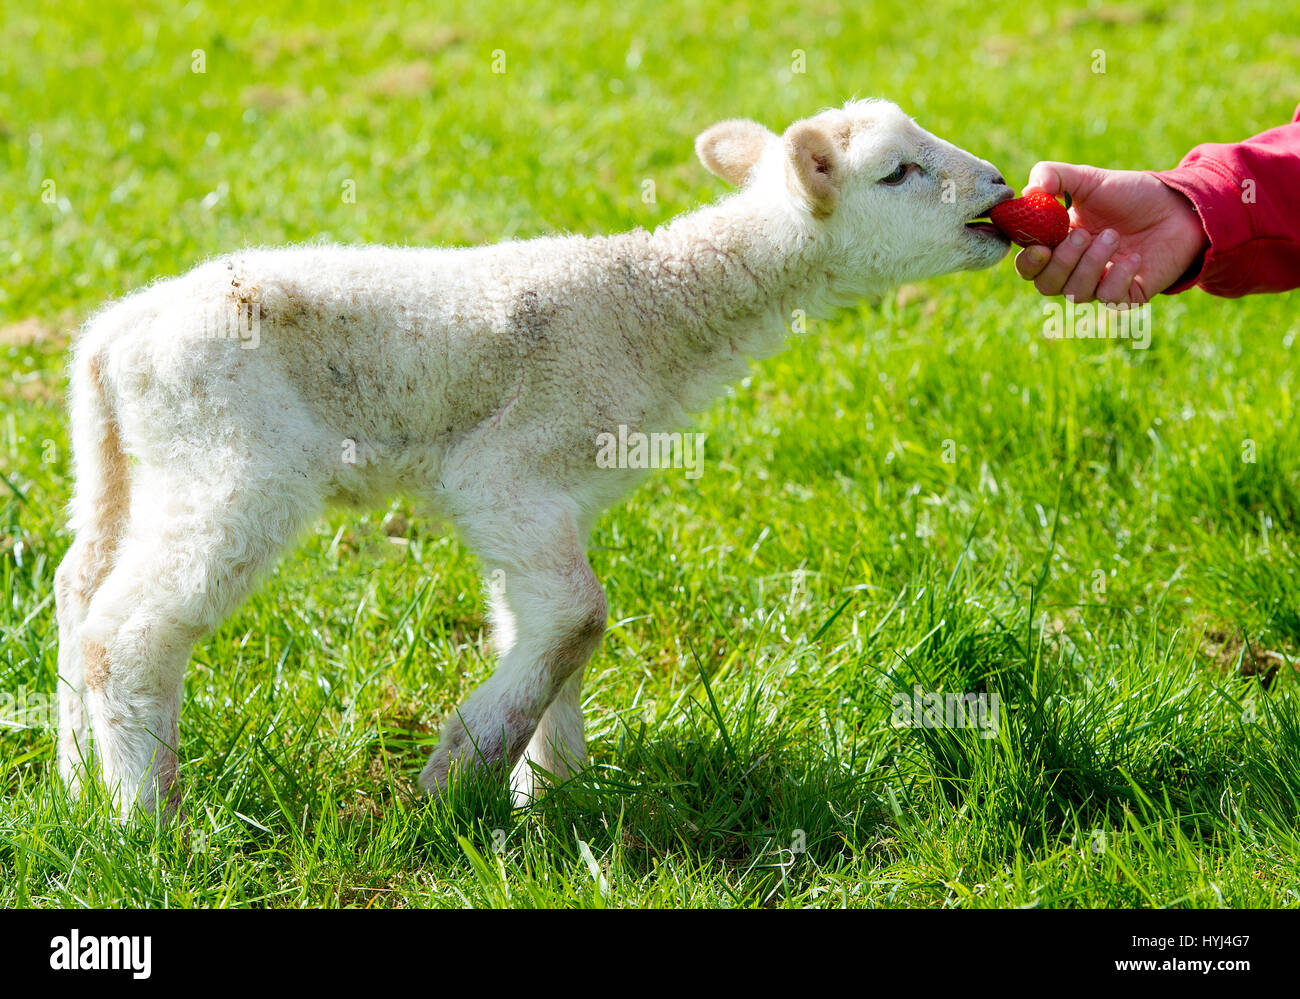 Bolton, UK. 4th Apr, 2017. Beautiful warm spring sunshine enticed this two day old lamb out into the light at Smithills Hall Farm, Bolton, Lancashire. The furry fellow took its first steps out in the outside world and also got a taste of its first strawberry as the sunny weather continued in the North West of England. Picture by Paul Heyes, Tuesday April 04, 2017. Credit: Paul Heyes/Alamy Live News Stock Photo